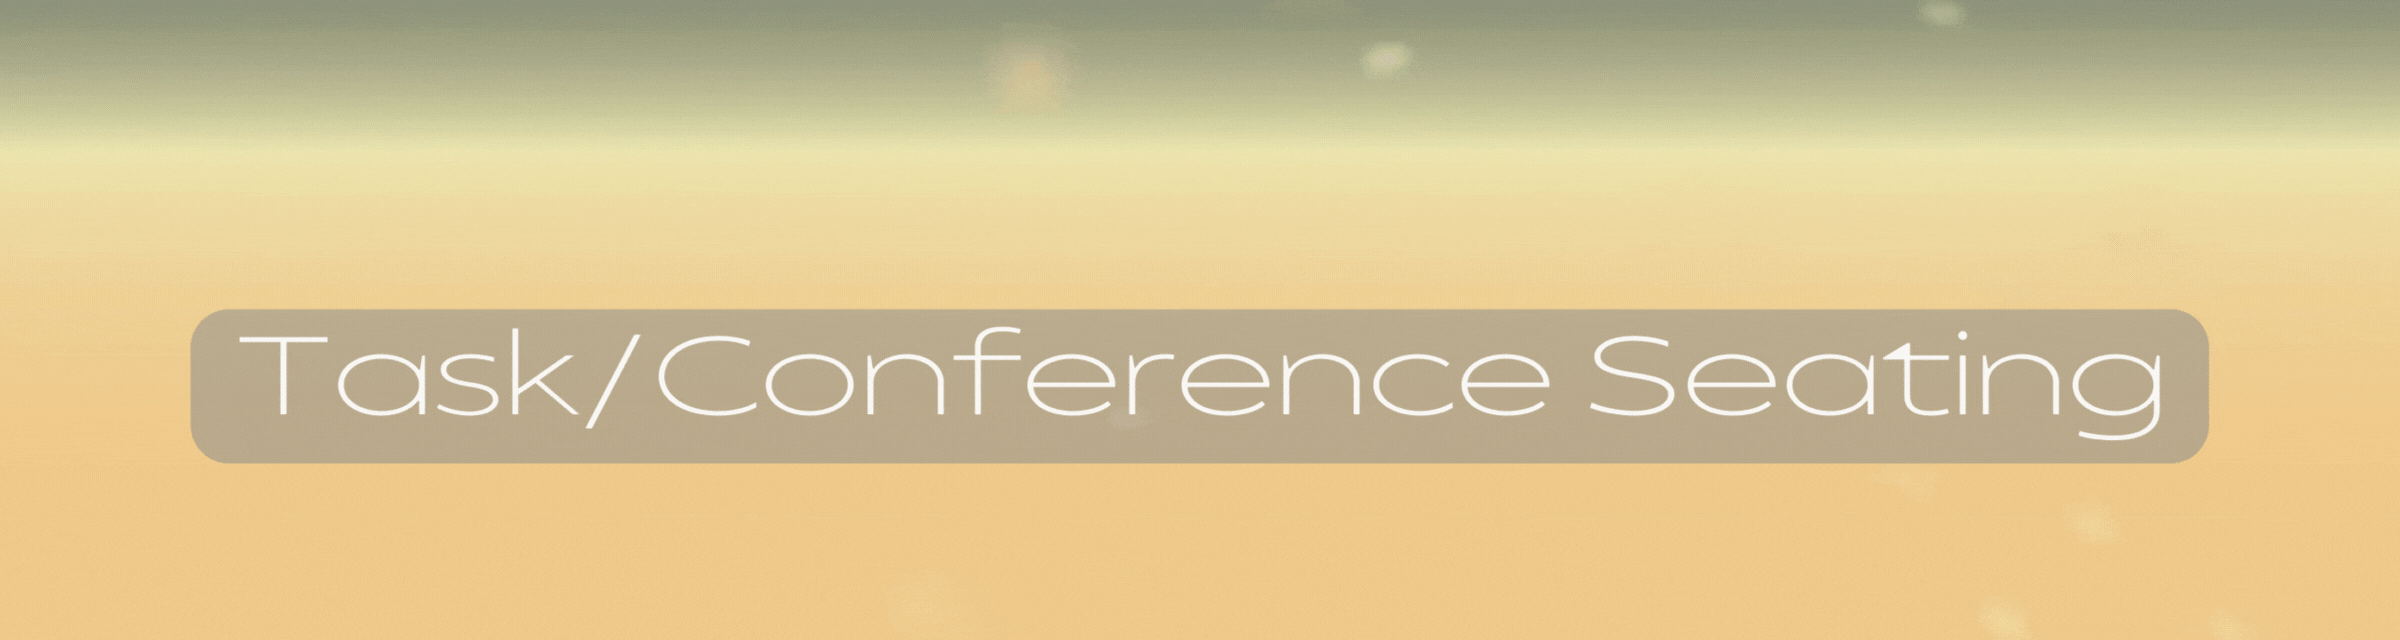 Task-Conference seating banner